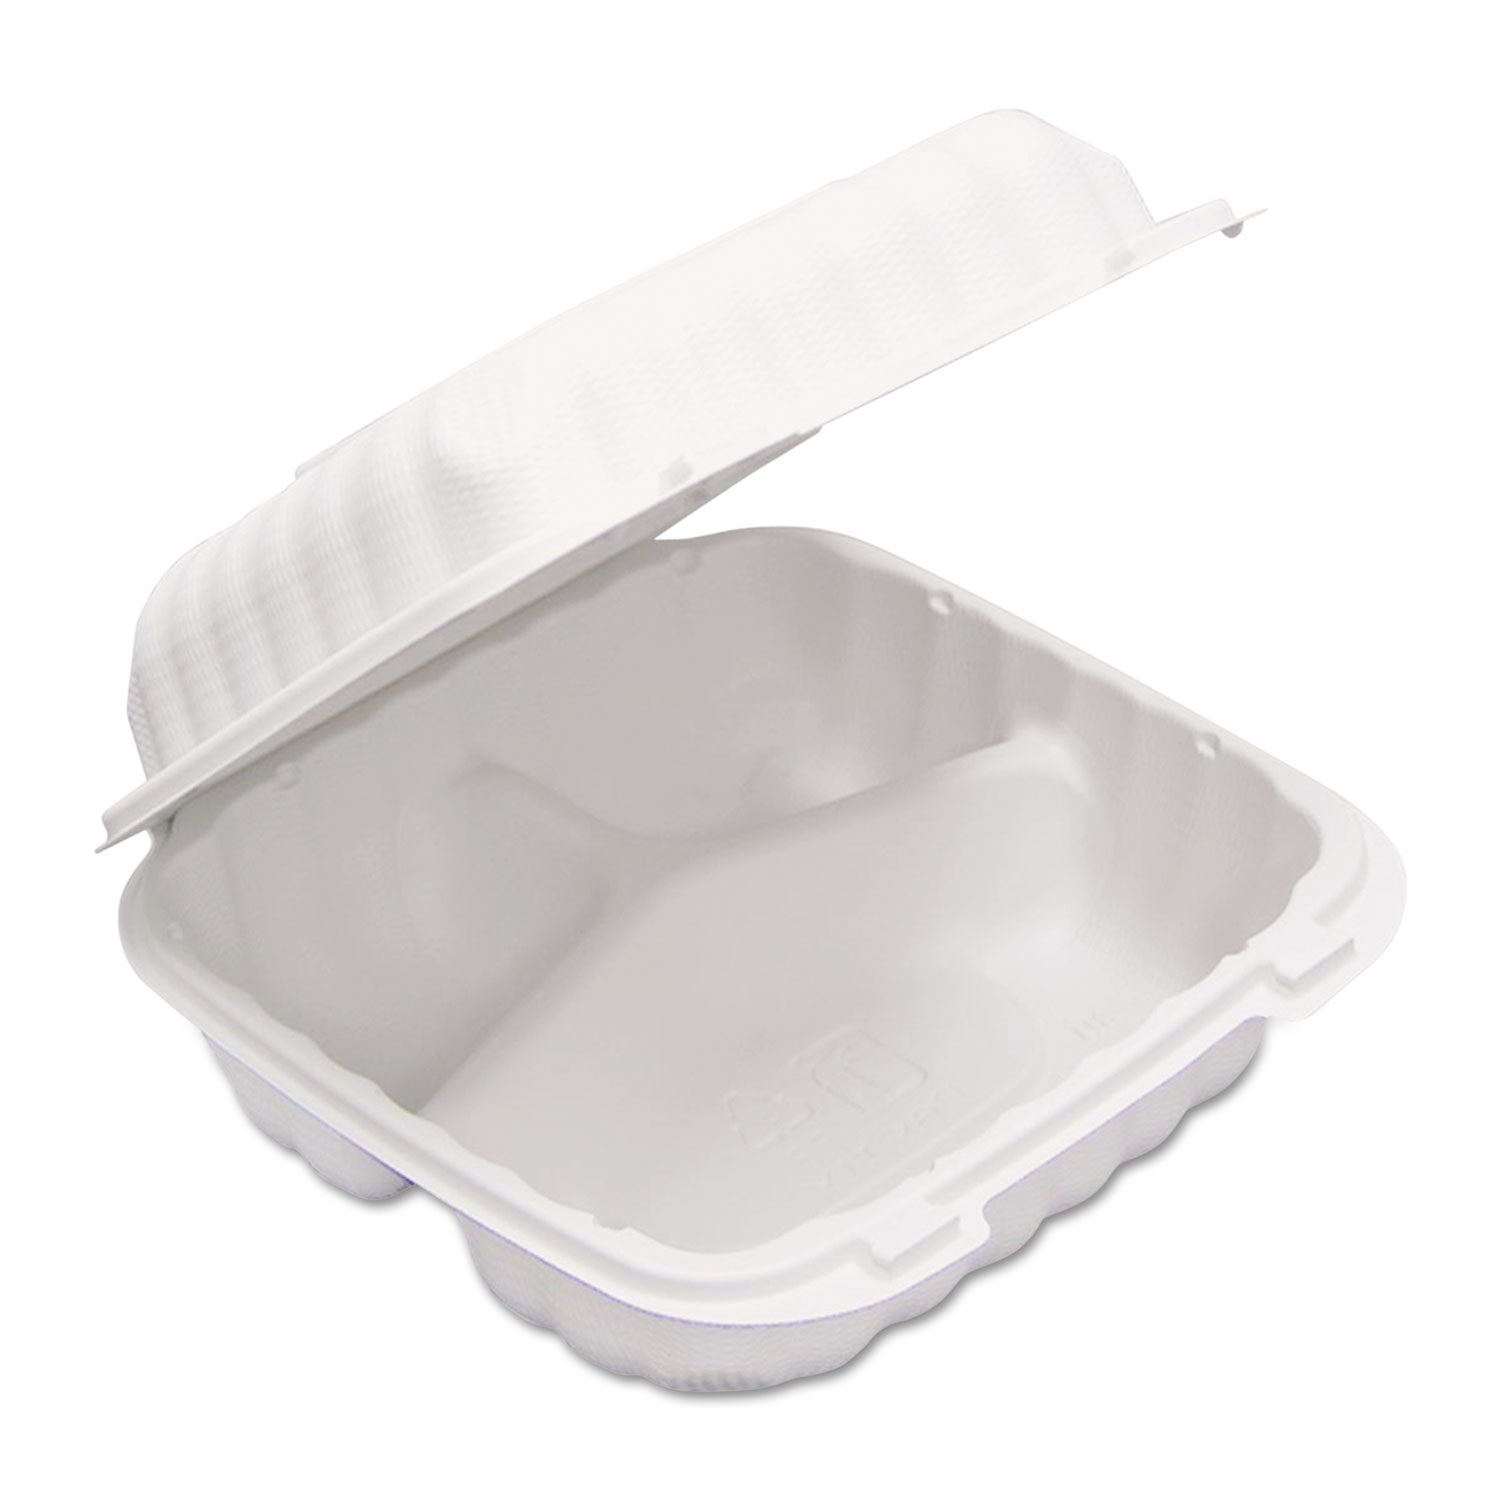  Pactiv YCN808030000 EarthChoice SmartLock Hinged Lid Containers, 22 oz, White, 200/Carton (PCTYCN80803) 